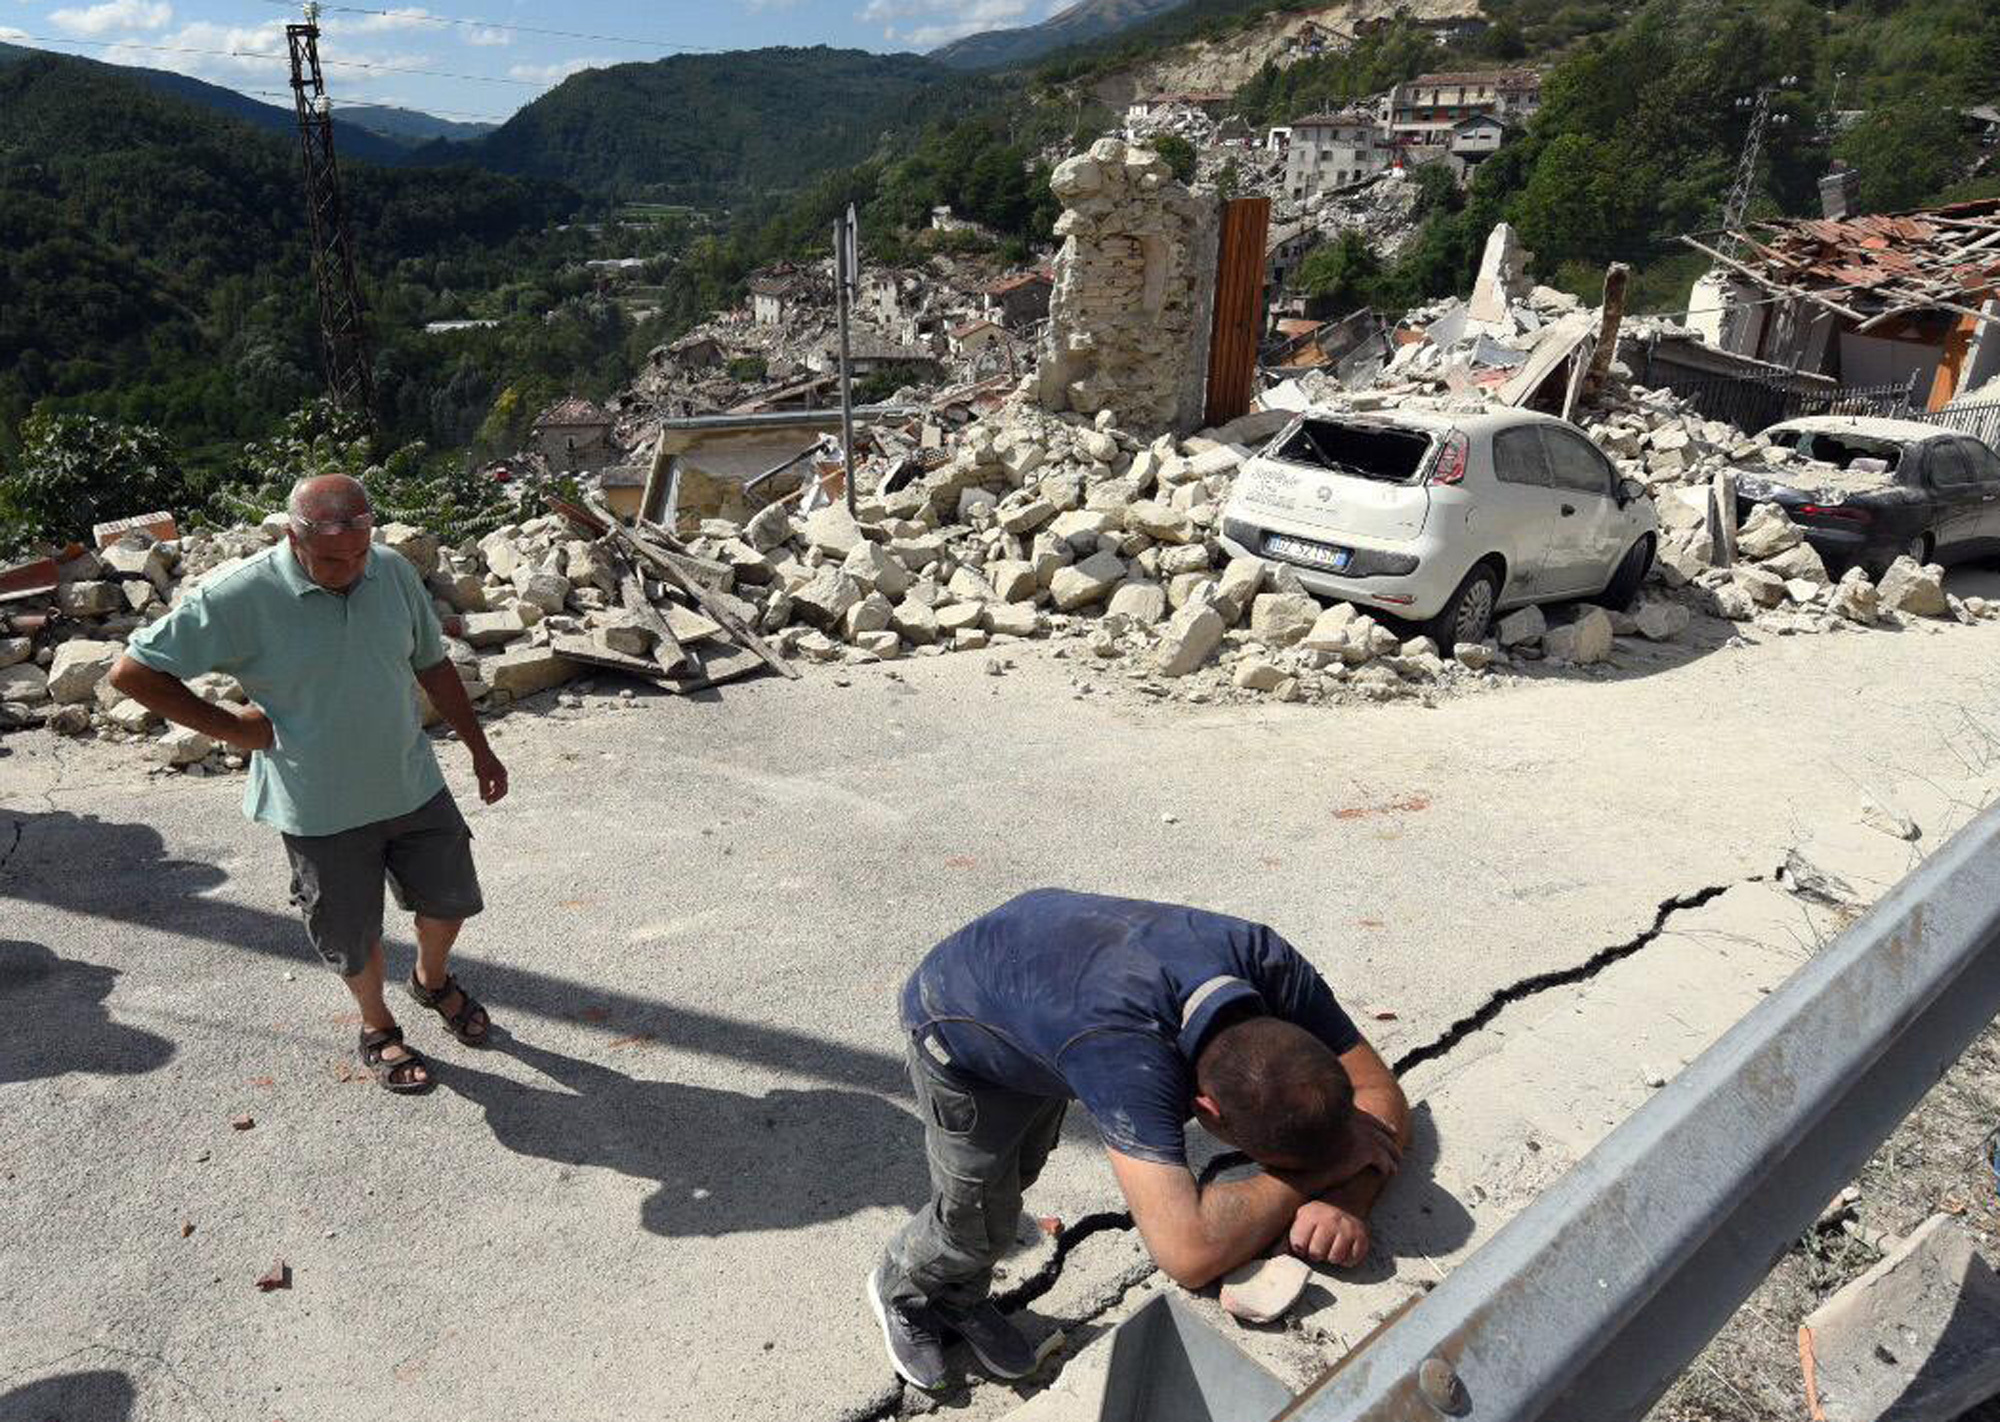 PHOTO: A man leans on a wall as the collapsed village of Pescara del Tronto, Italy, is seen behind him, Aug. 24 2016 following an earthquake.